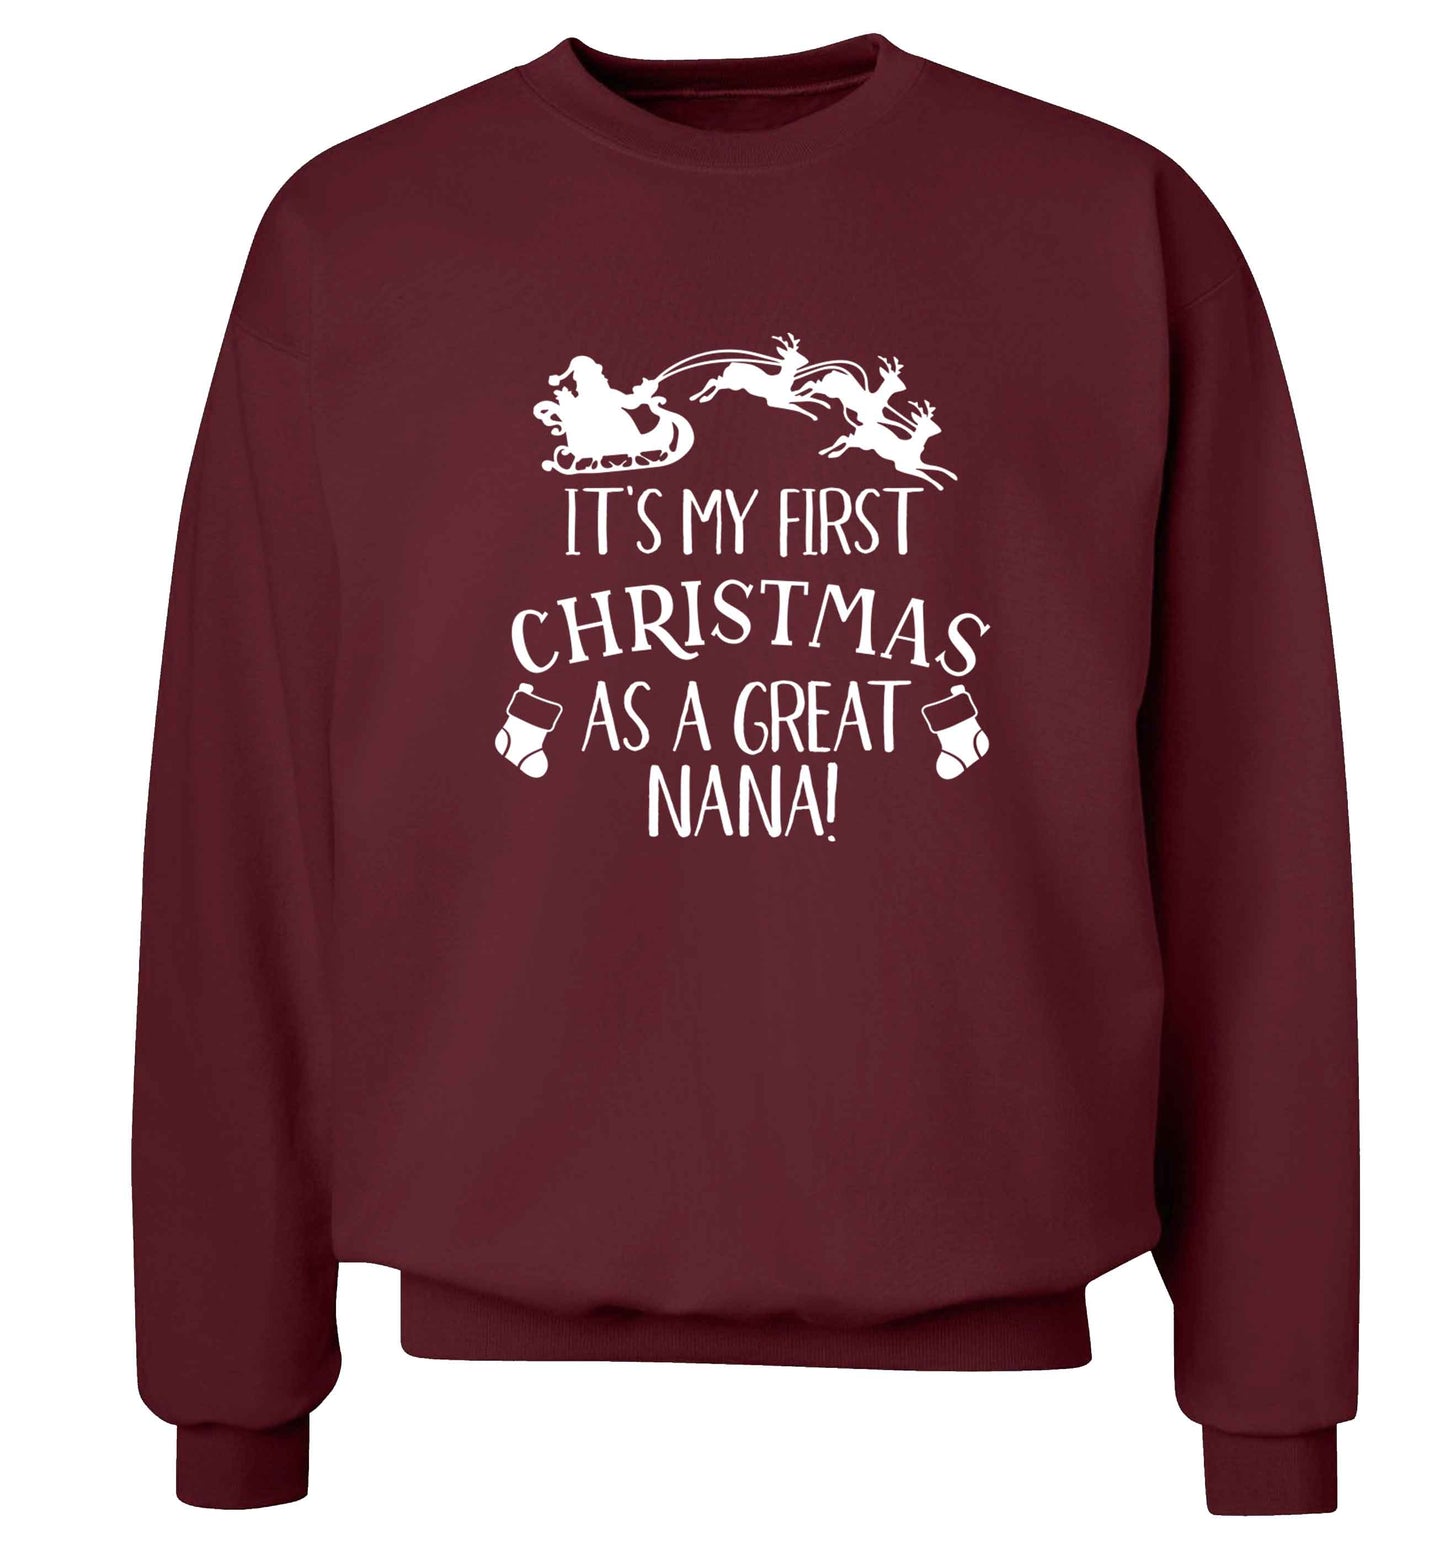 It's my first Christmas as a great nana! Adult's unisex maroon Sweater 2XL